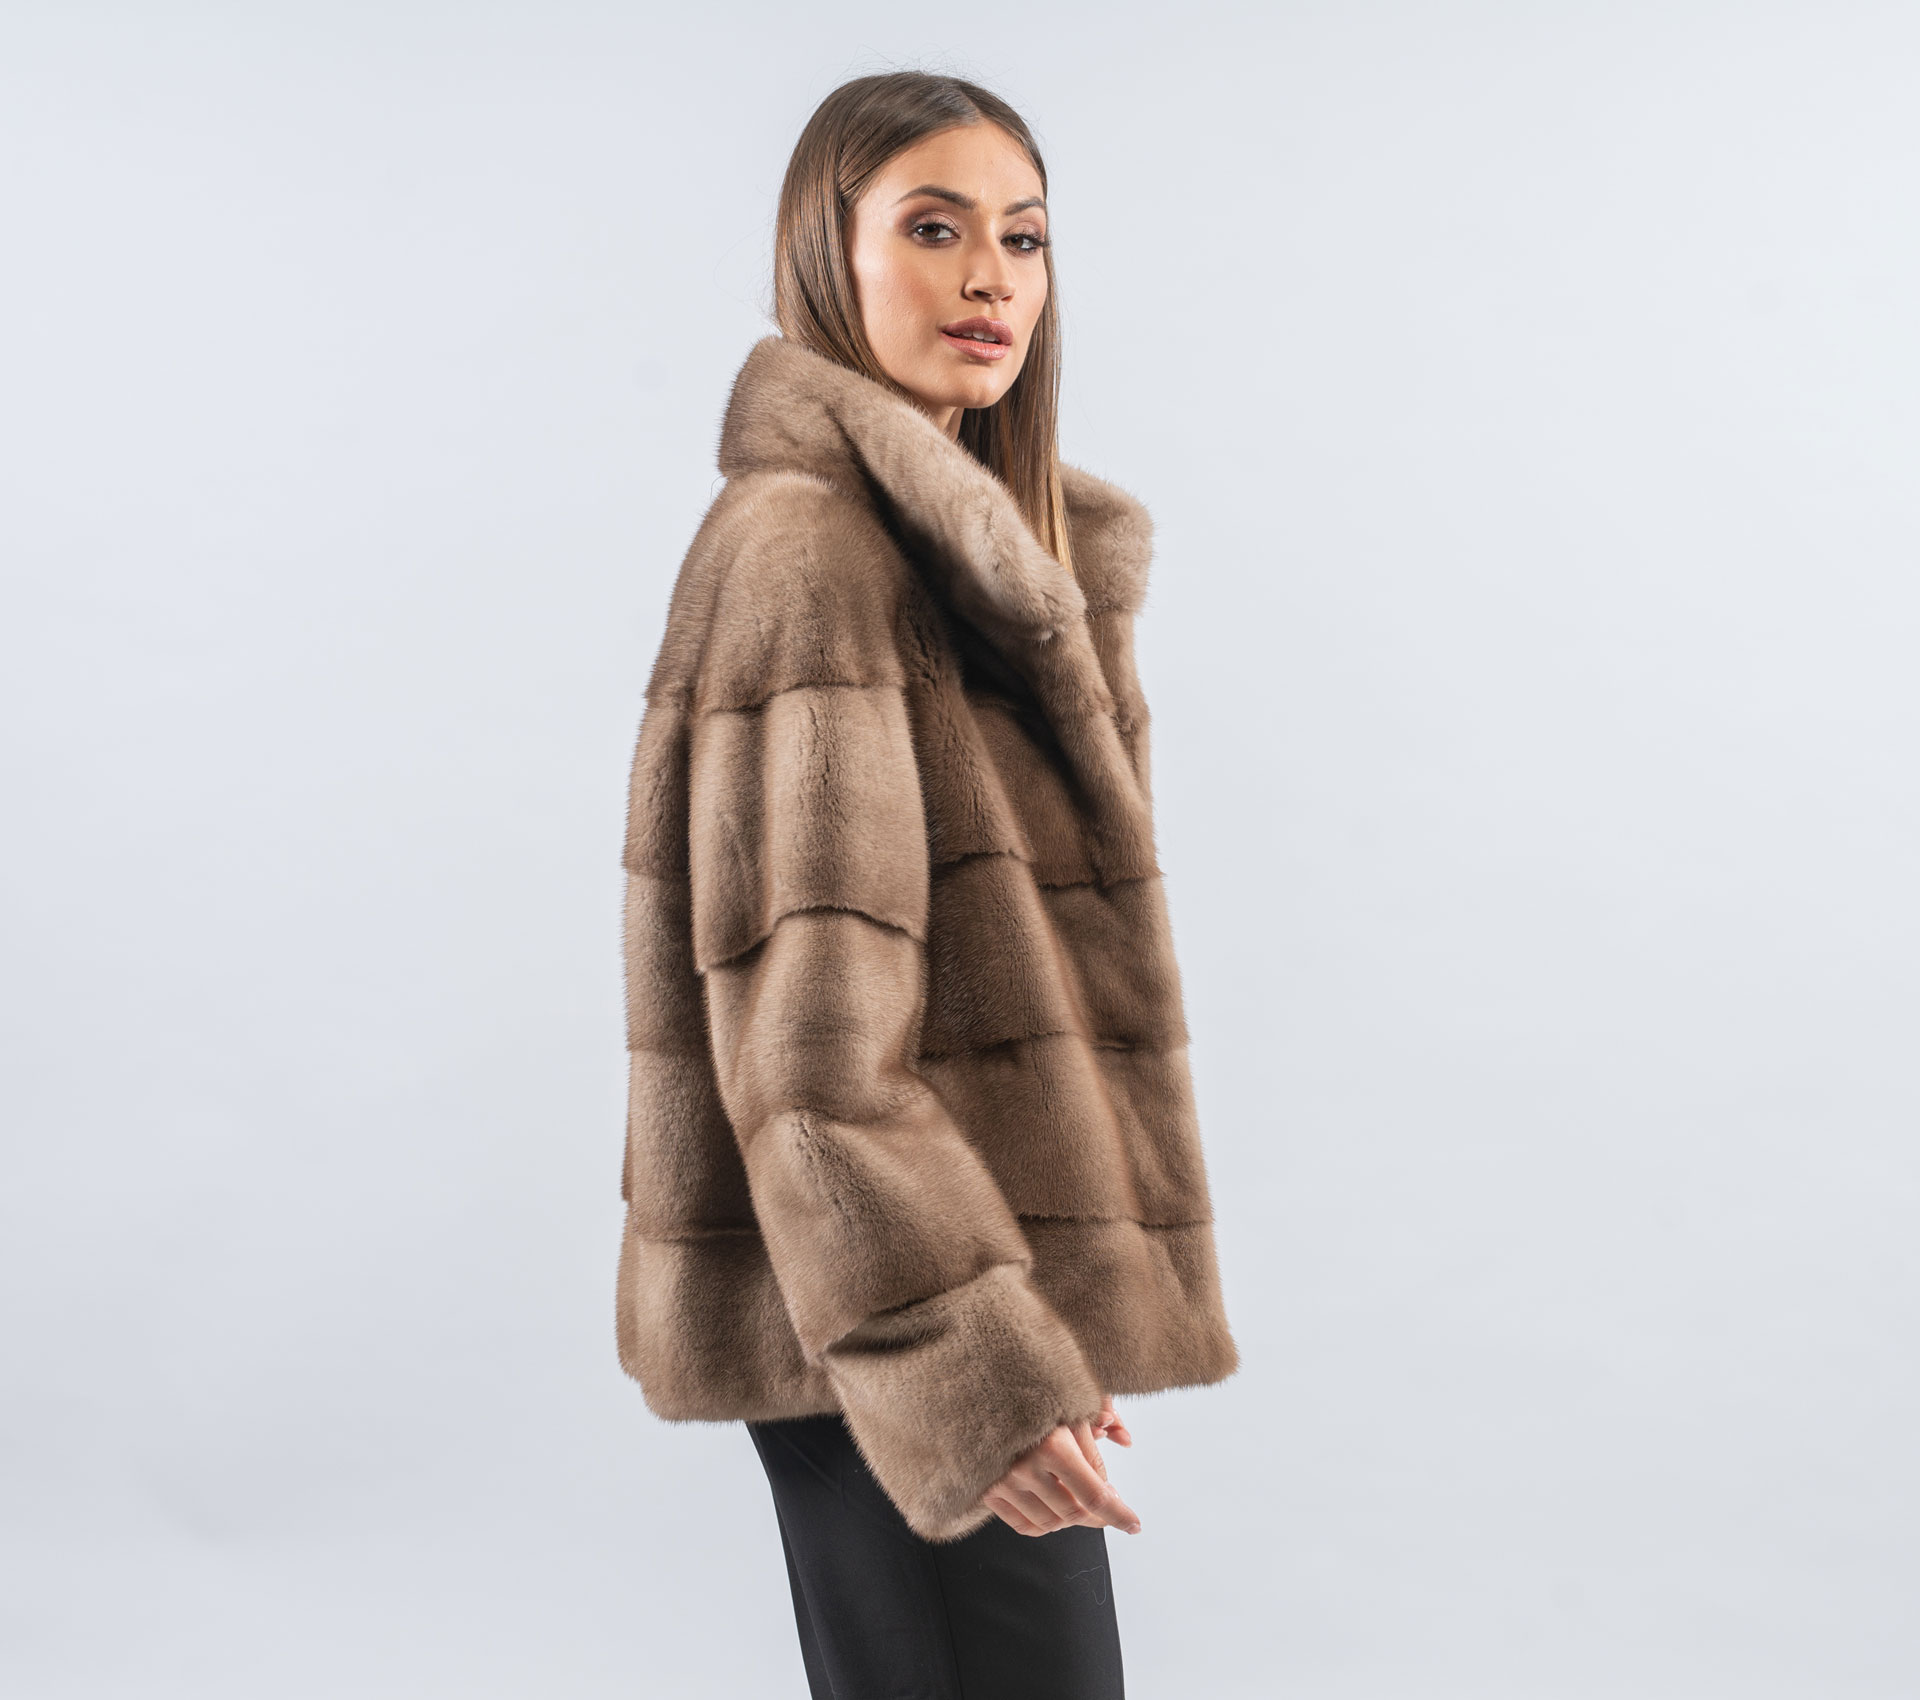 Haute Acorn Pastel Mink Fur Jacket with Rolled Up Sleeves